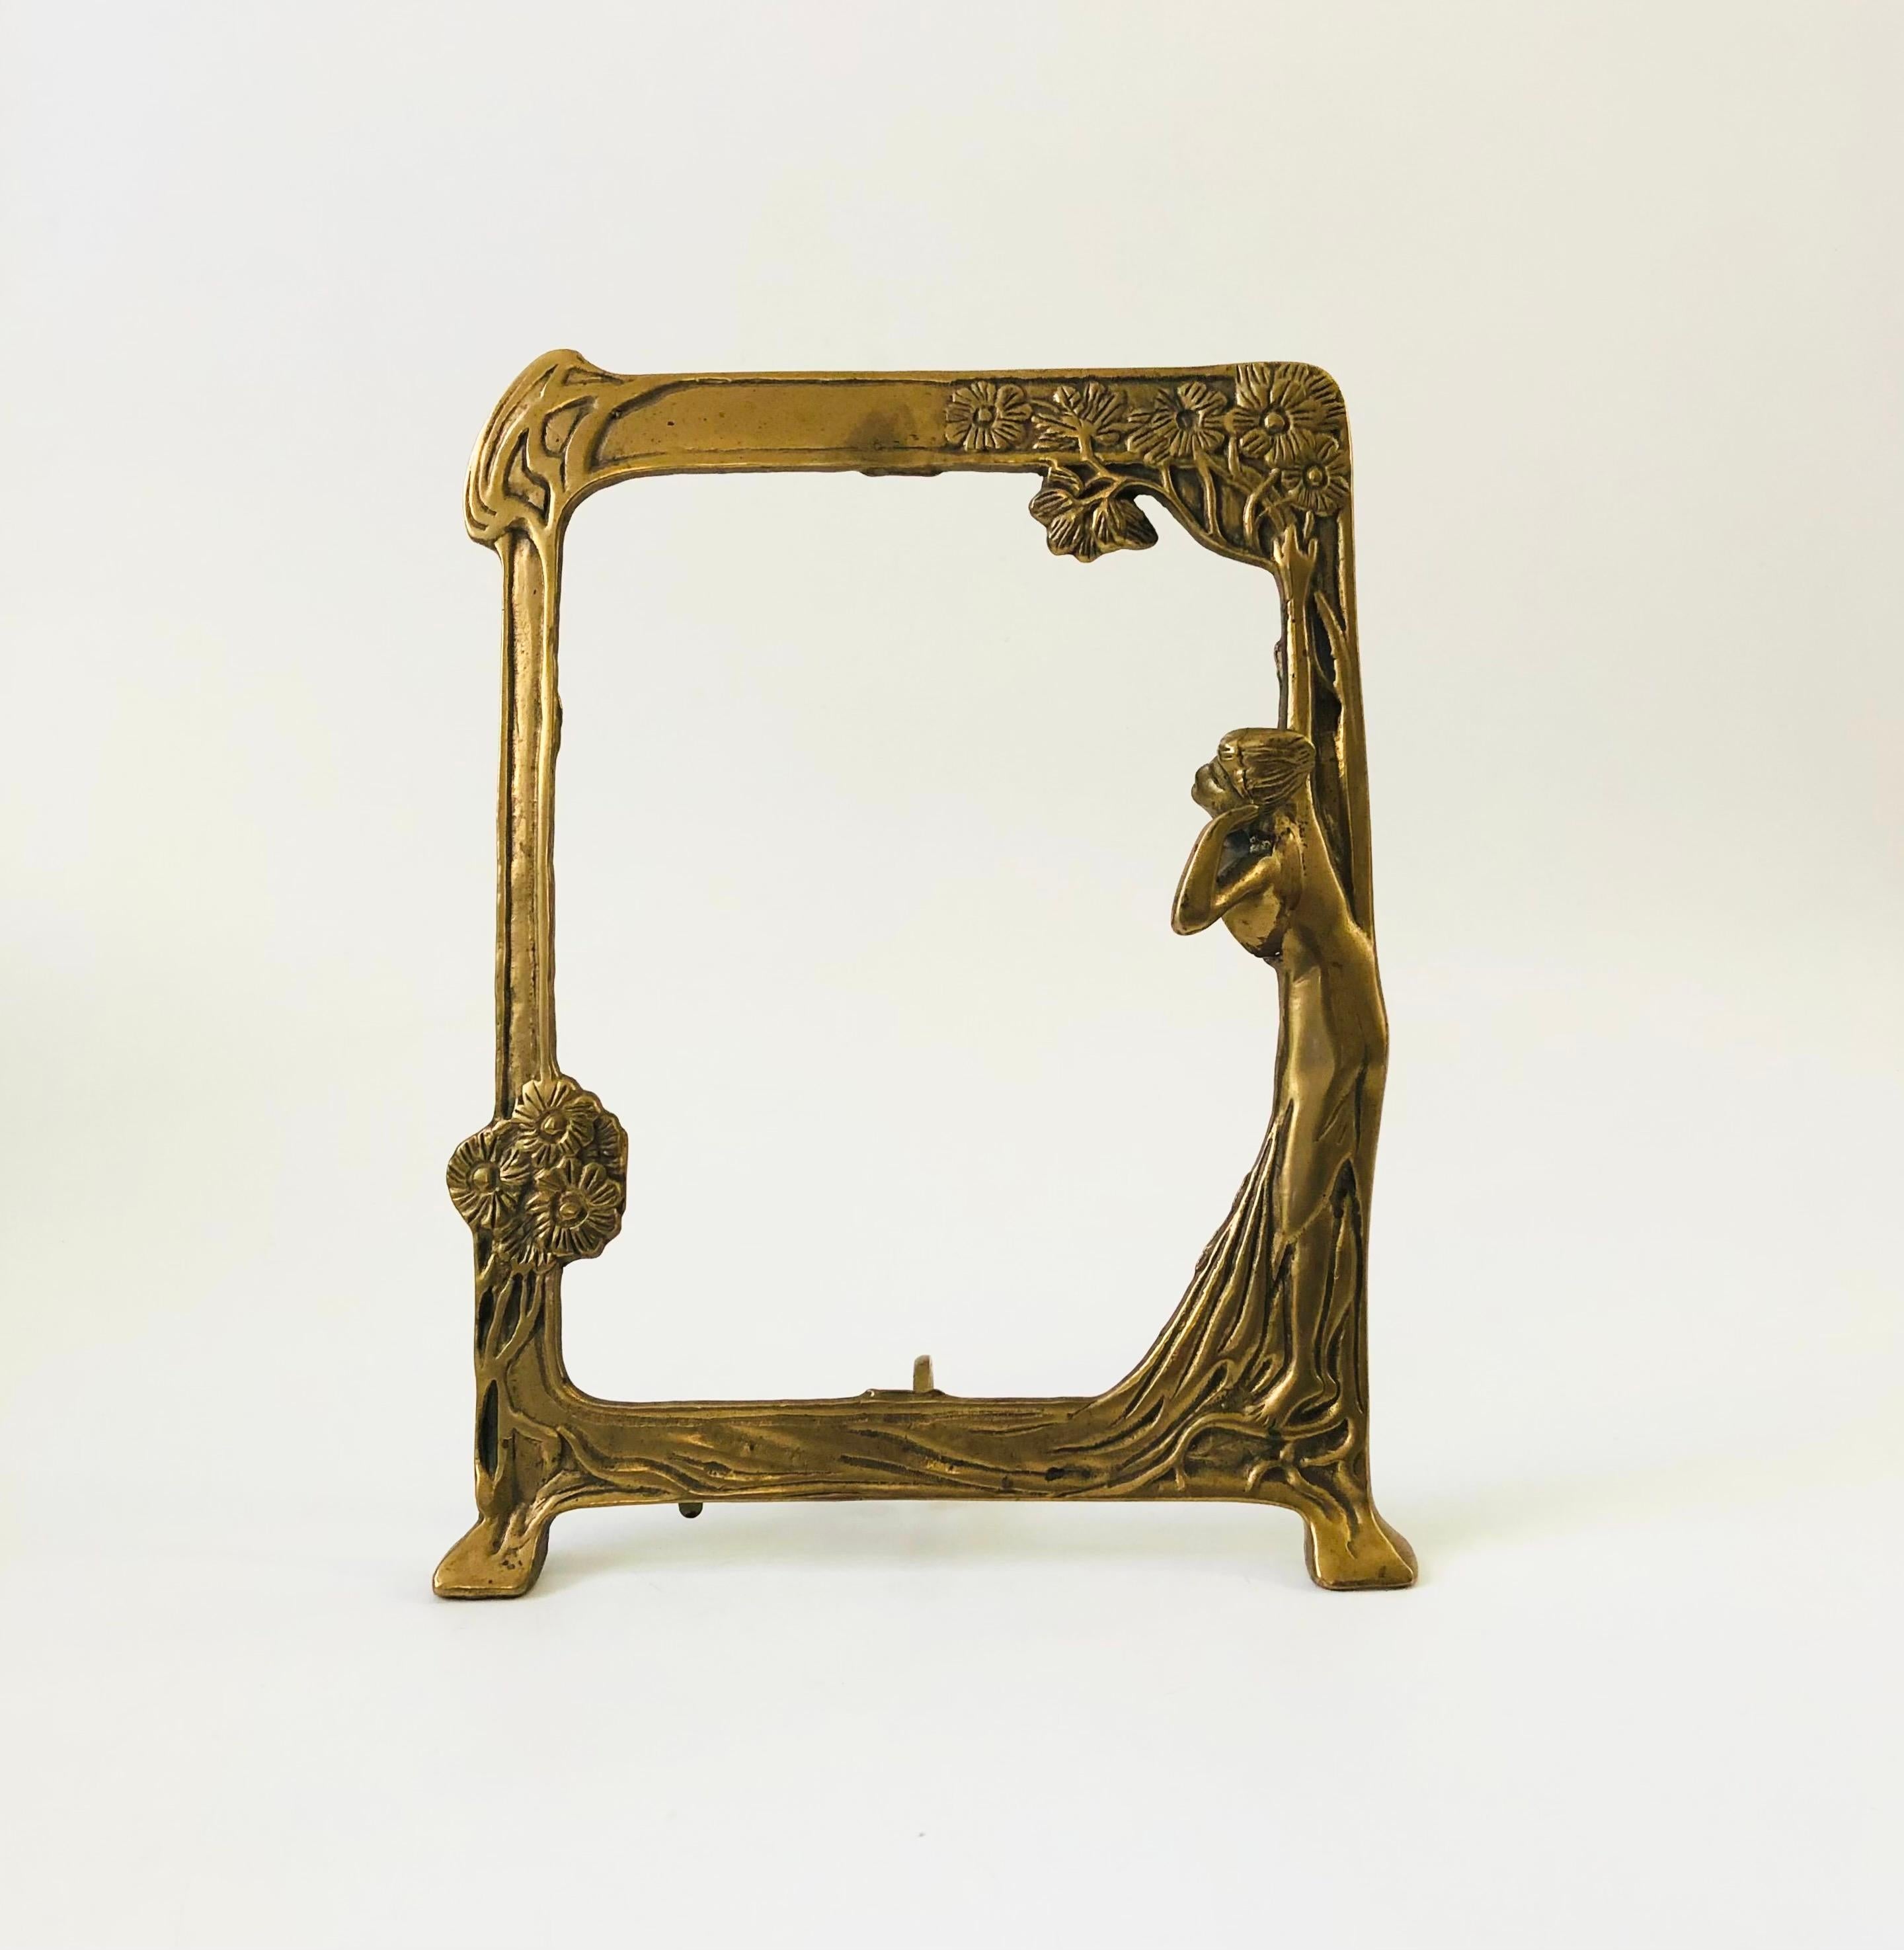 A vintage art nouveau brass lady of the lake picture frame. Beautiful detailing throughout with an easel back for using table top.

